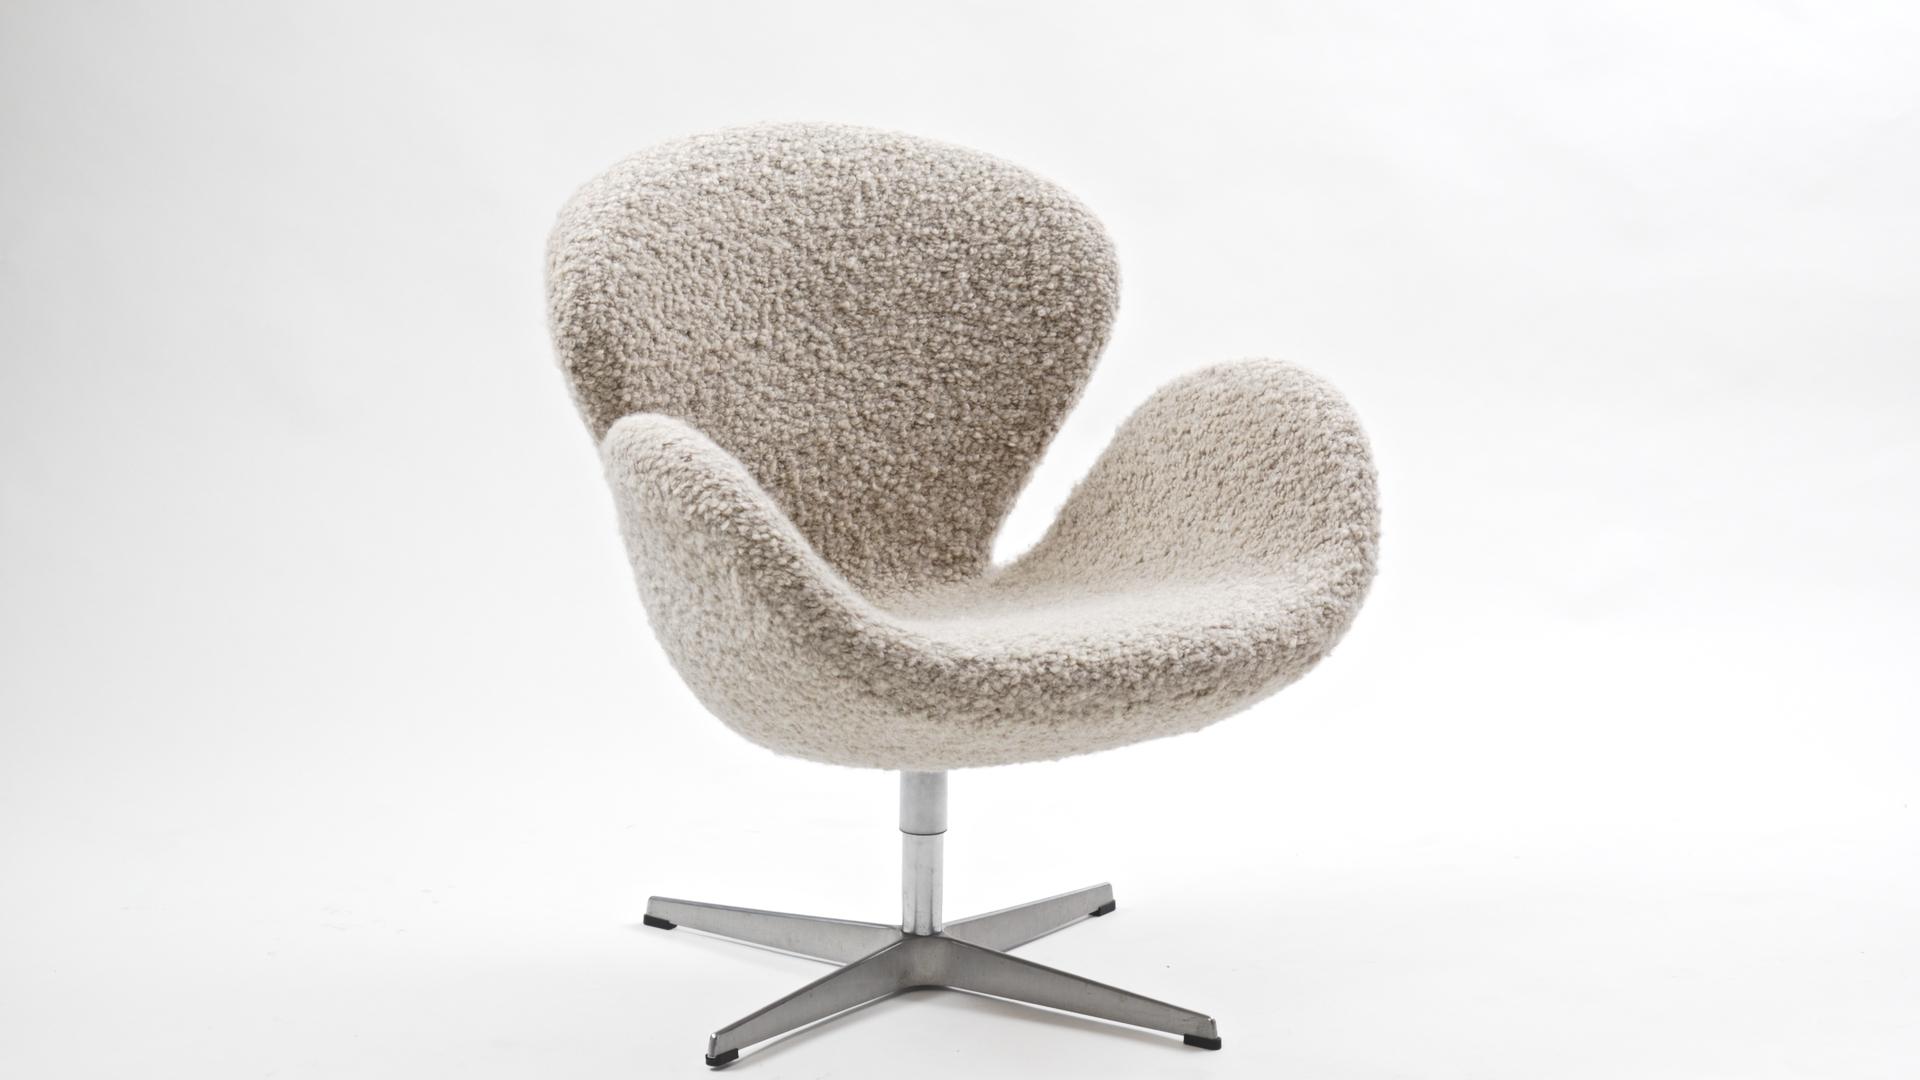 2005 production of Arne Jacobsen's iconic Swan chair designed for SAS Hotel in Copenhagen. Arne designed all furniture, the building itself, and only commissioned art pieces to be done by someone else. Both the egg chair and the swan were used in